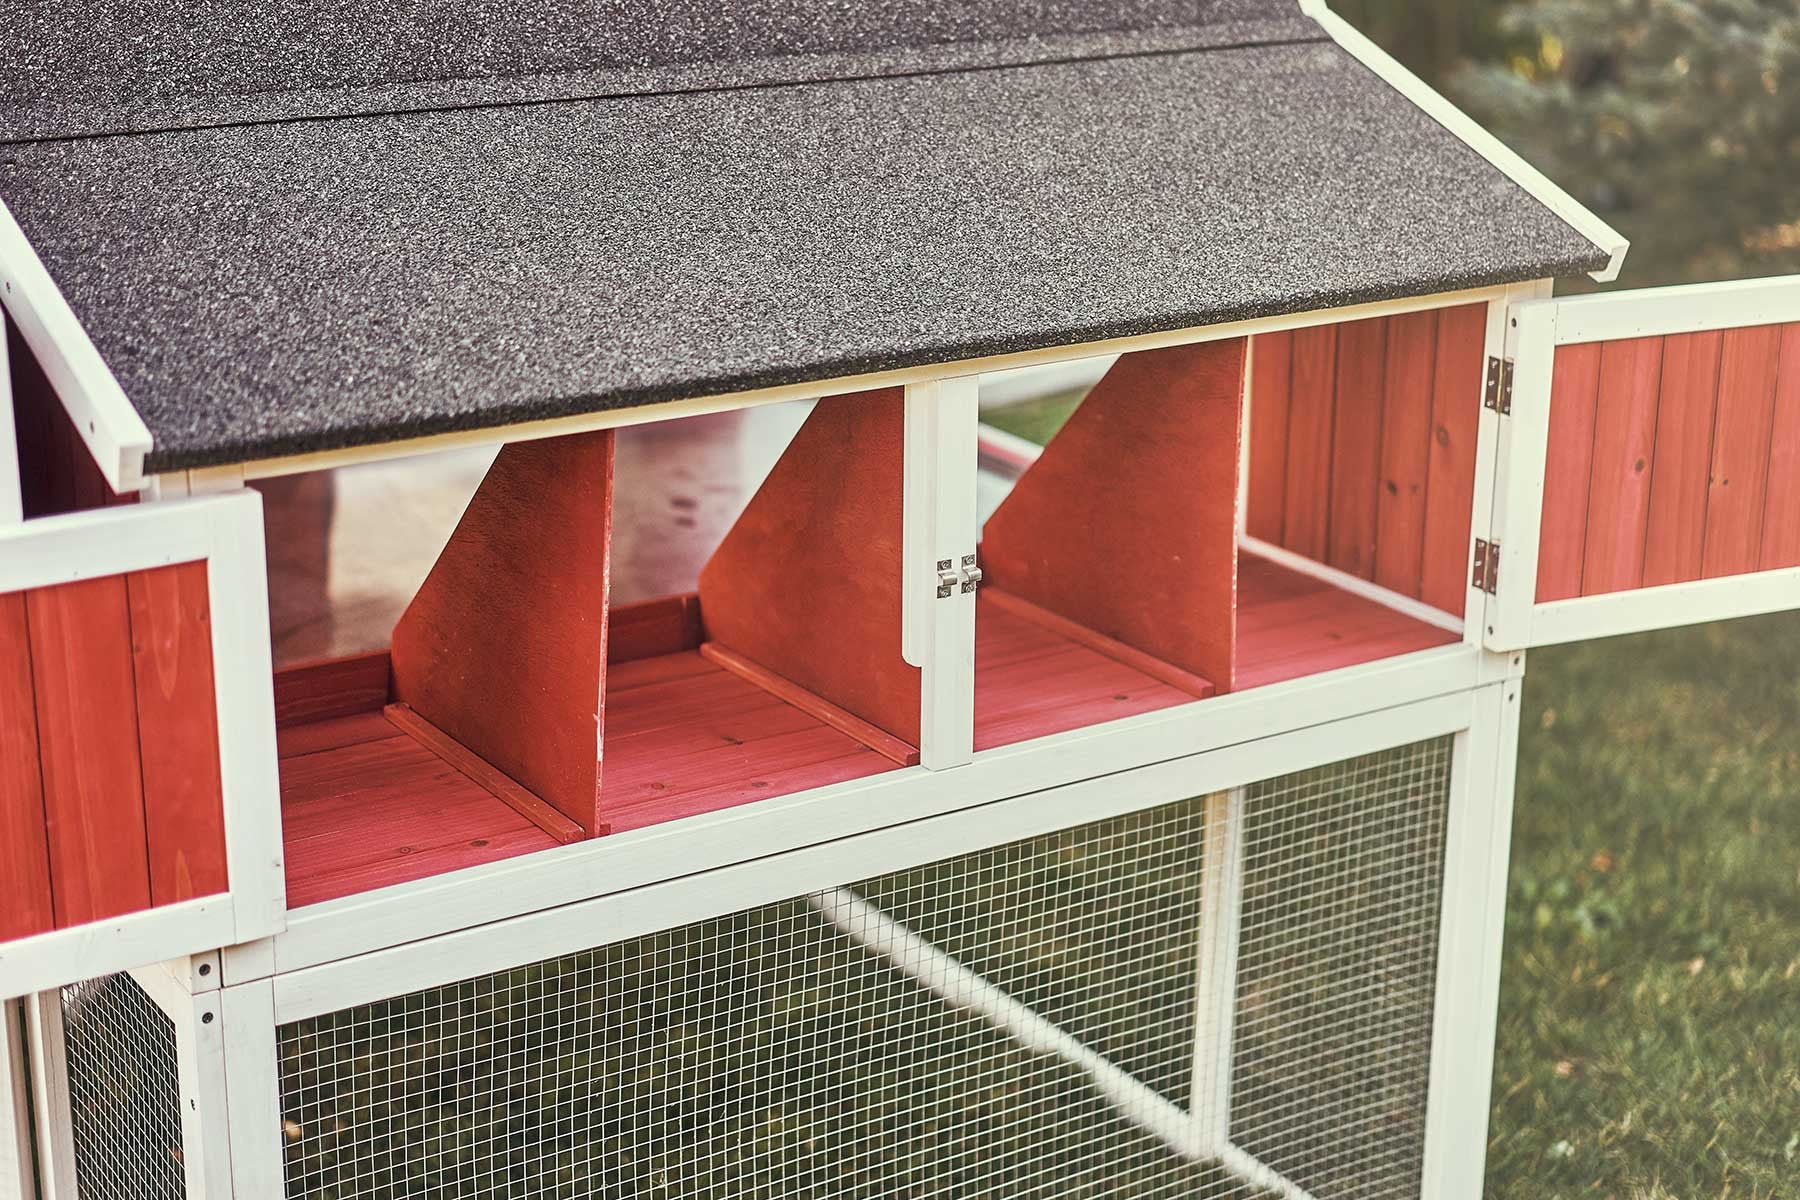 The Barn chicken coop's access doors to nesting areas show how easy it is to access eggs. The asphalt shingle roof will stand the test of time.